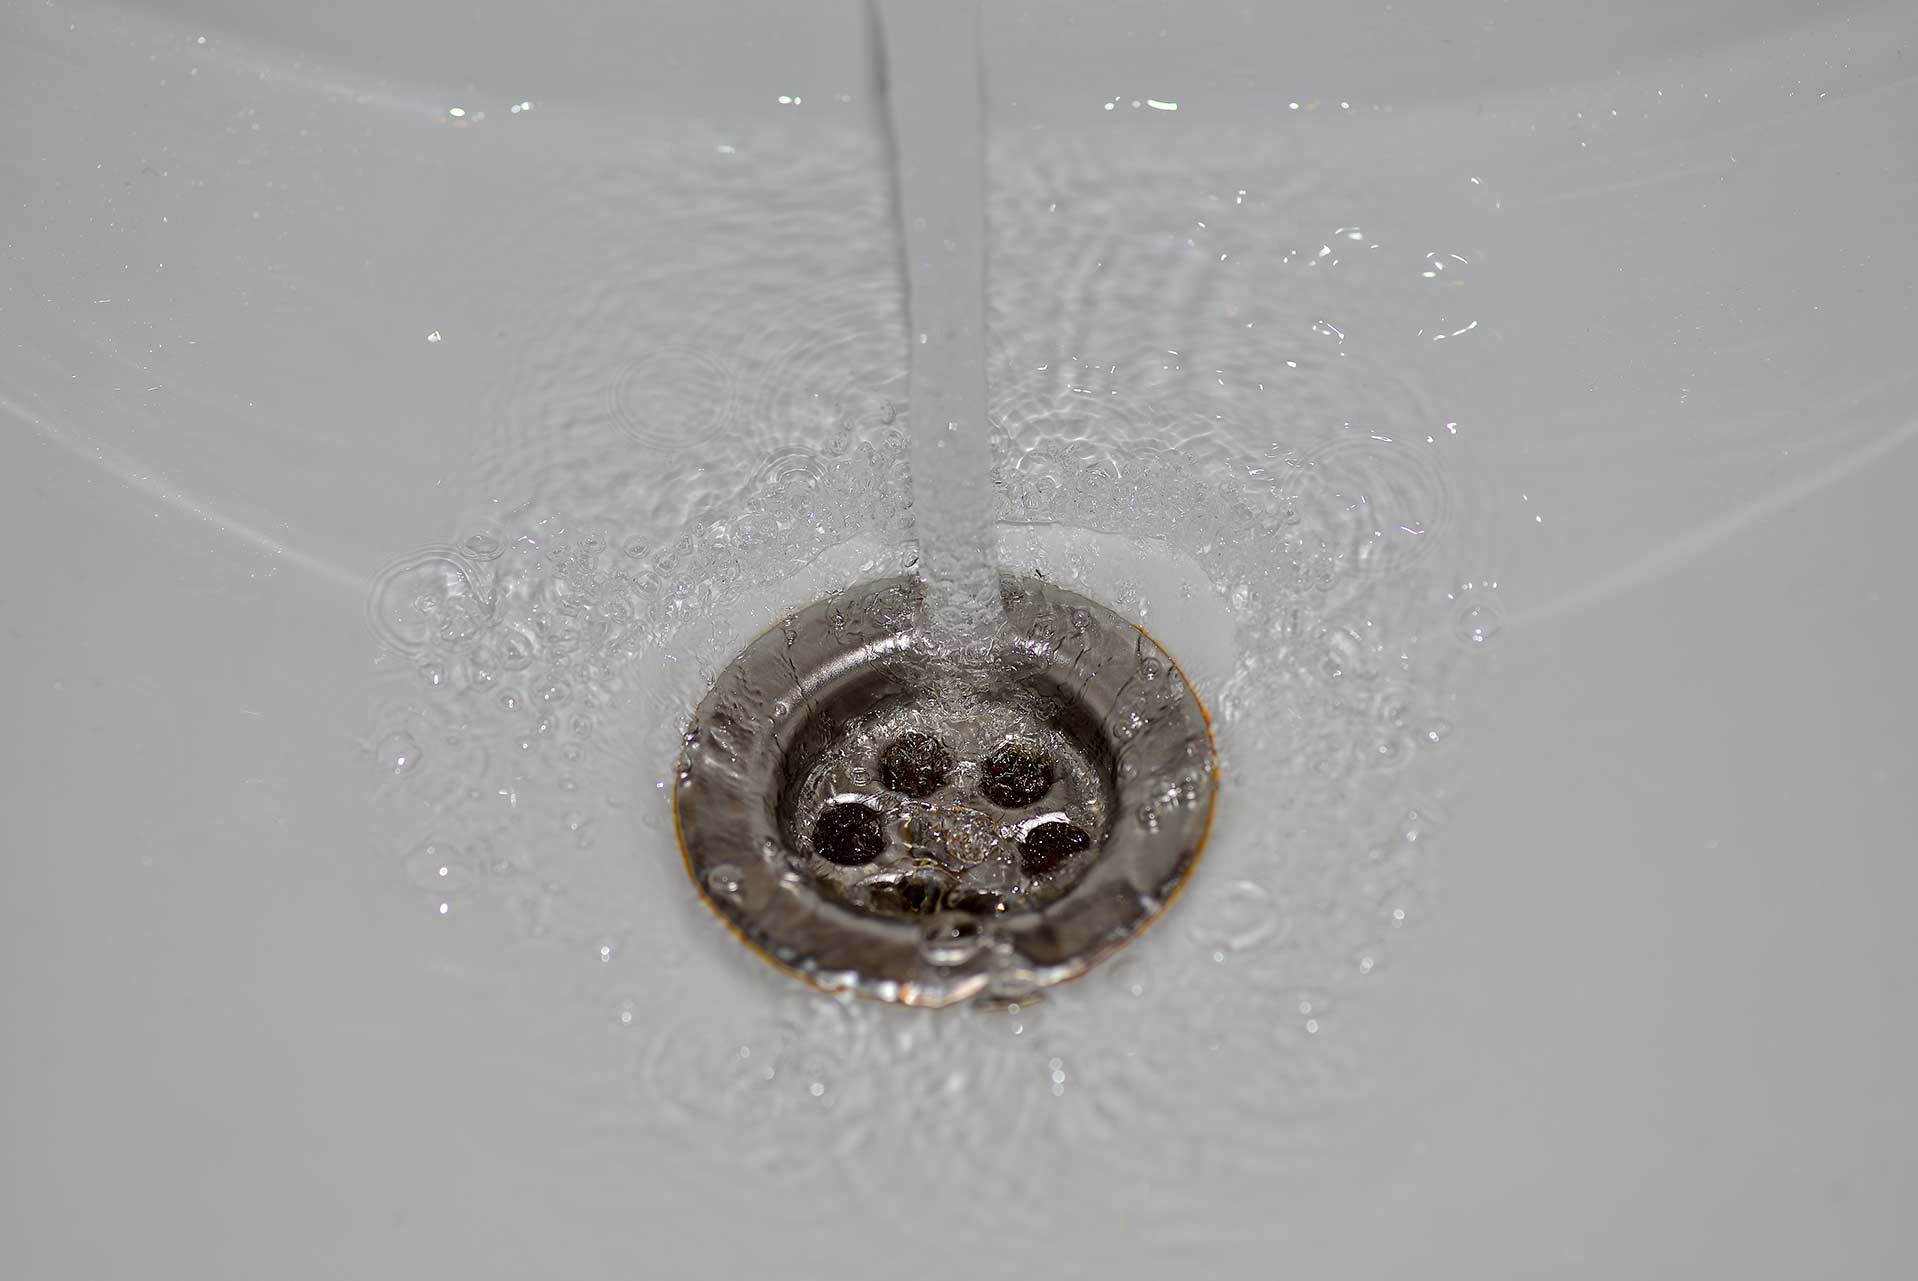 A2B Drains provides services to unblock blocked sinks and drains for properties in Knutsford.